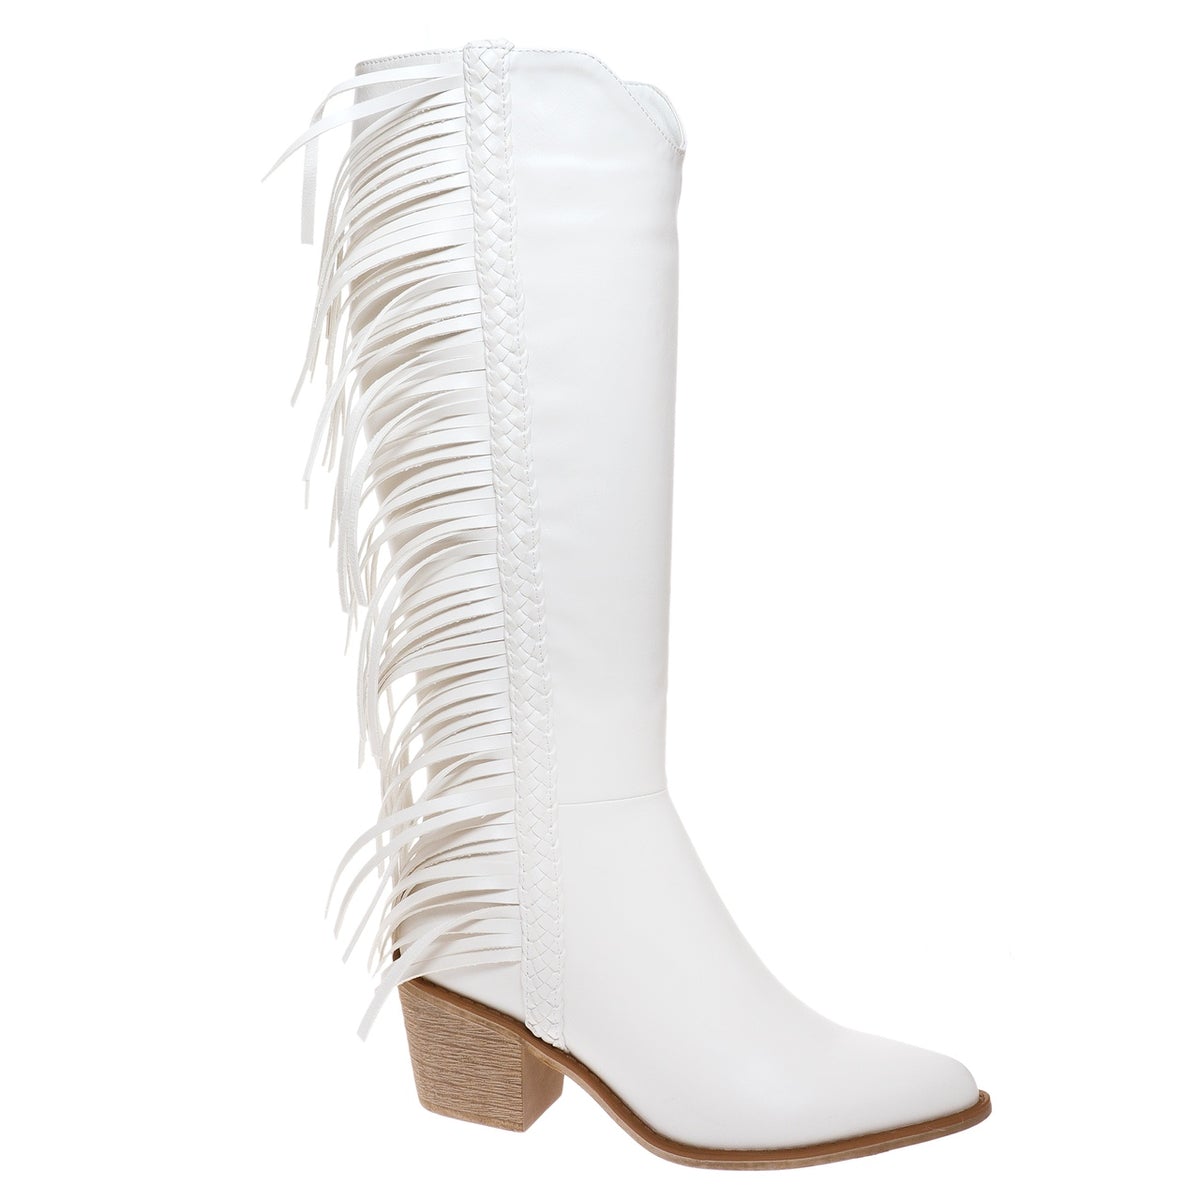 Wilder 3 Pierre Dumas Off White Fringe Above The Knee Boots - Kendry Collection boutique.jpg